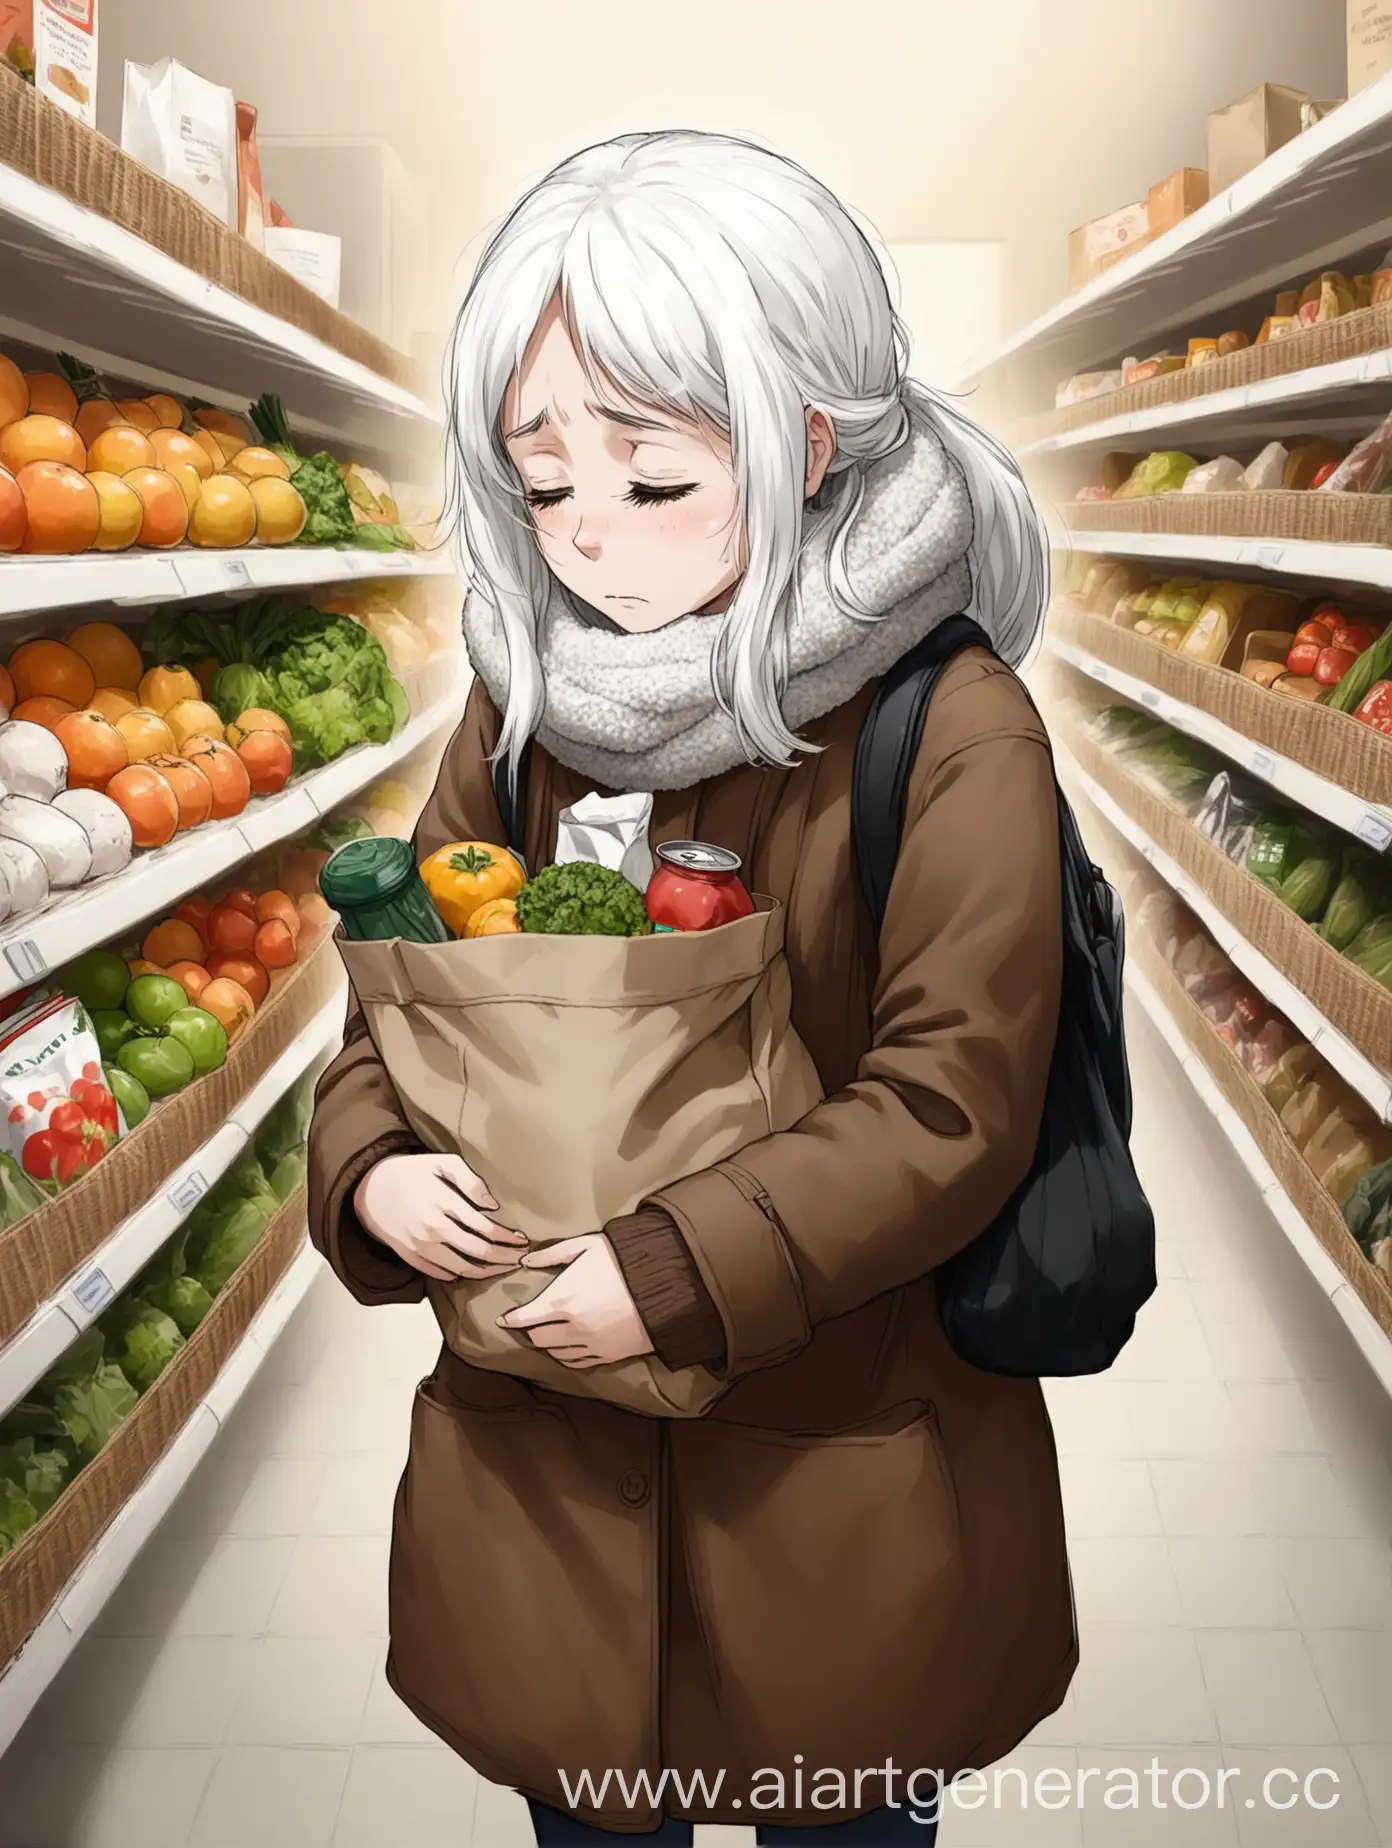 Sad-Girl-with-White-Hair-Carrying-Bag-and-Groceries